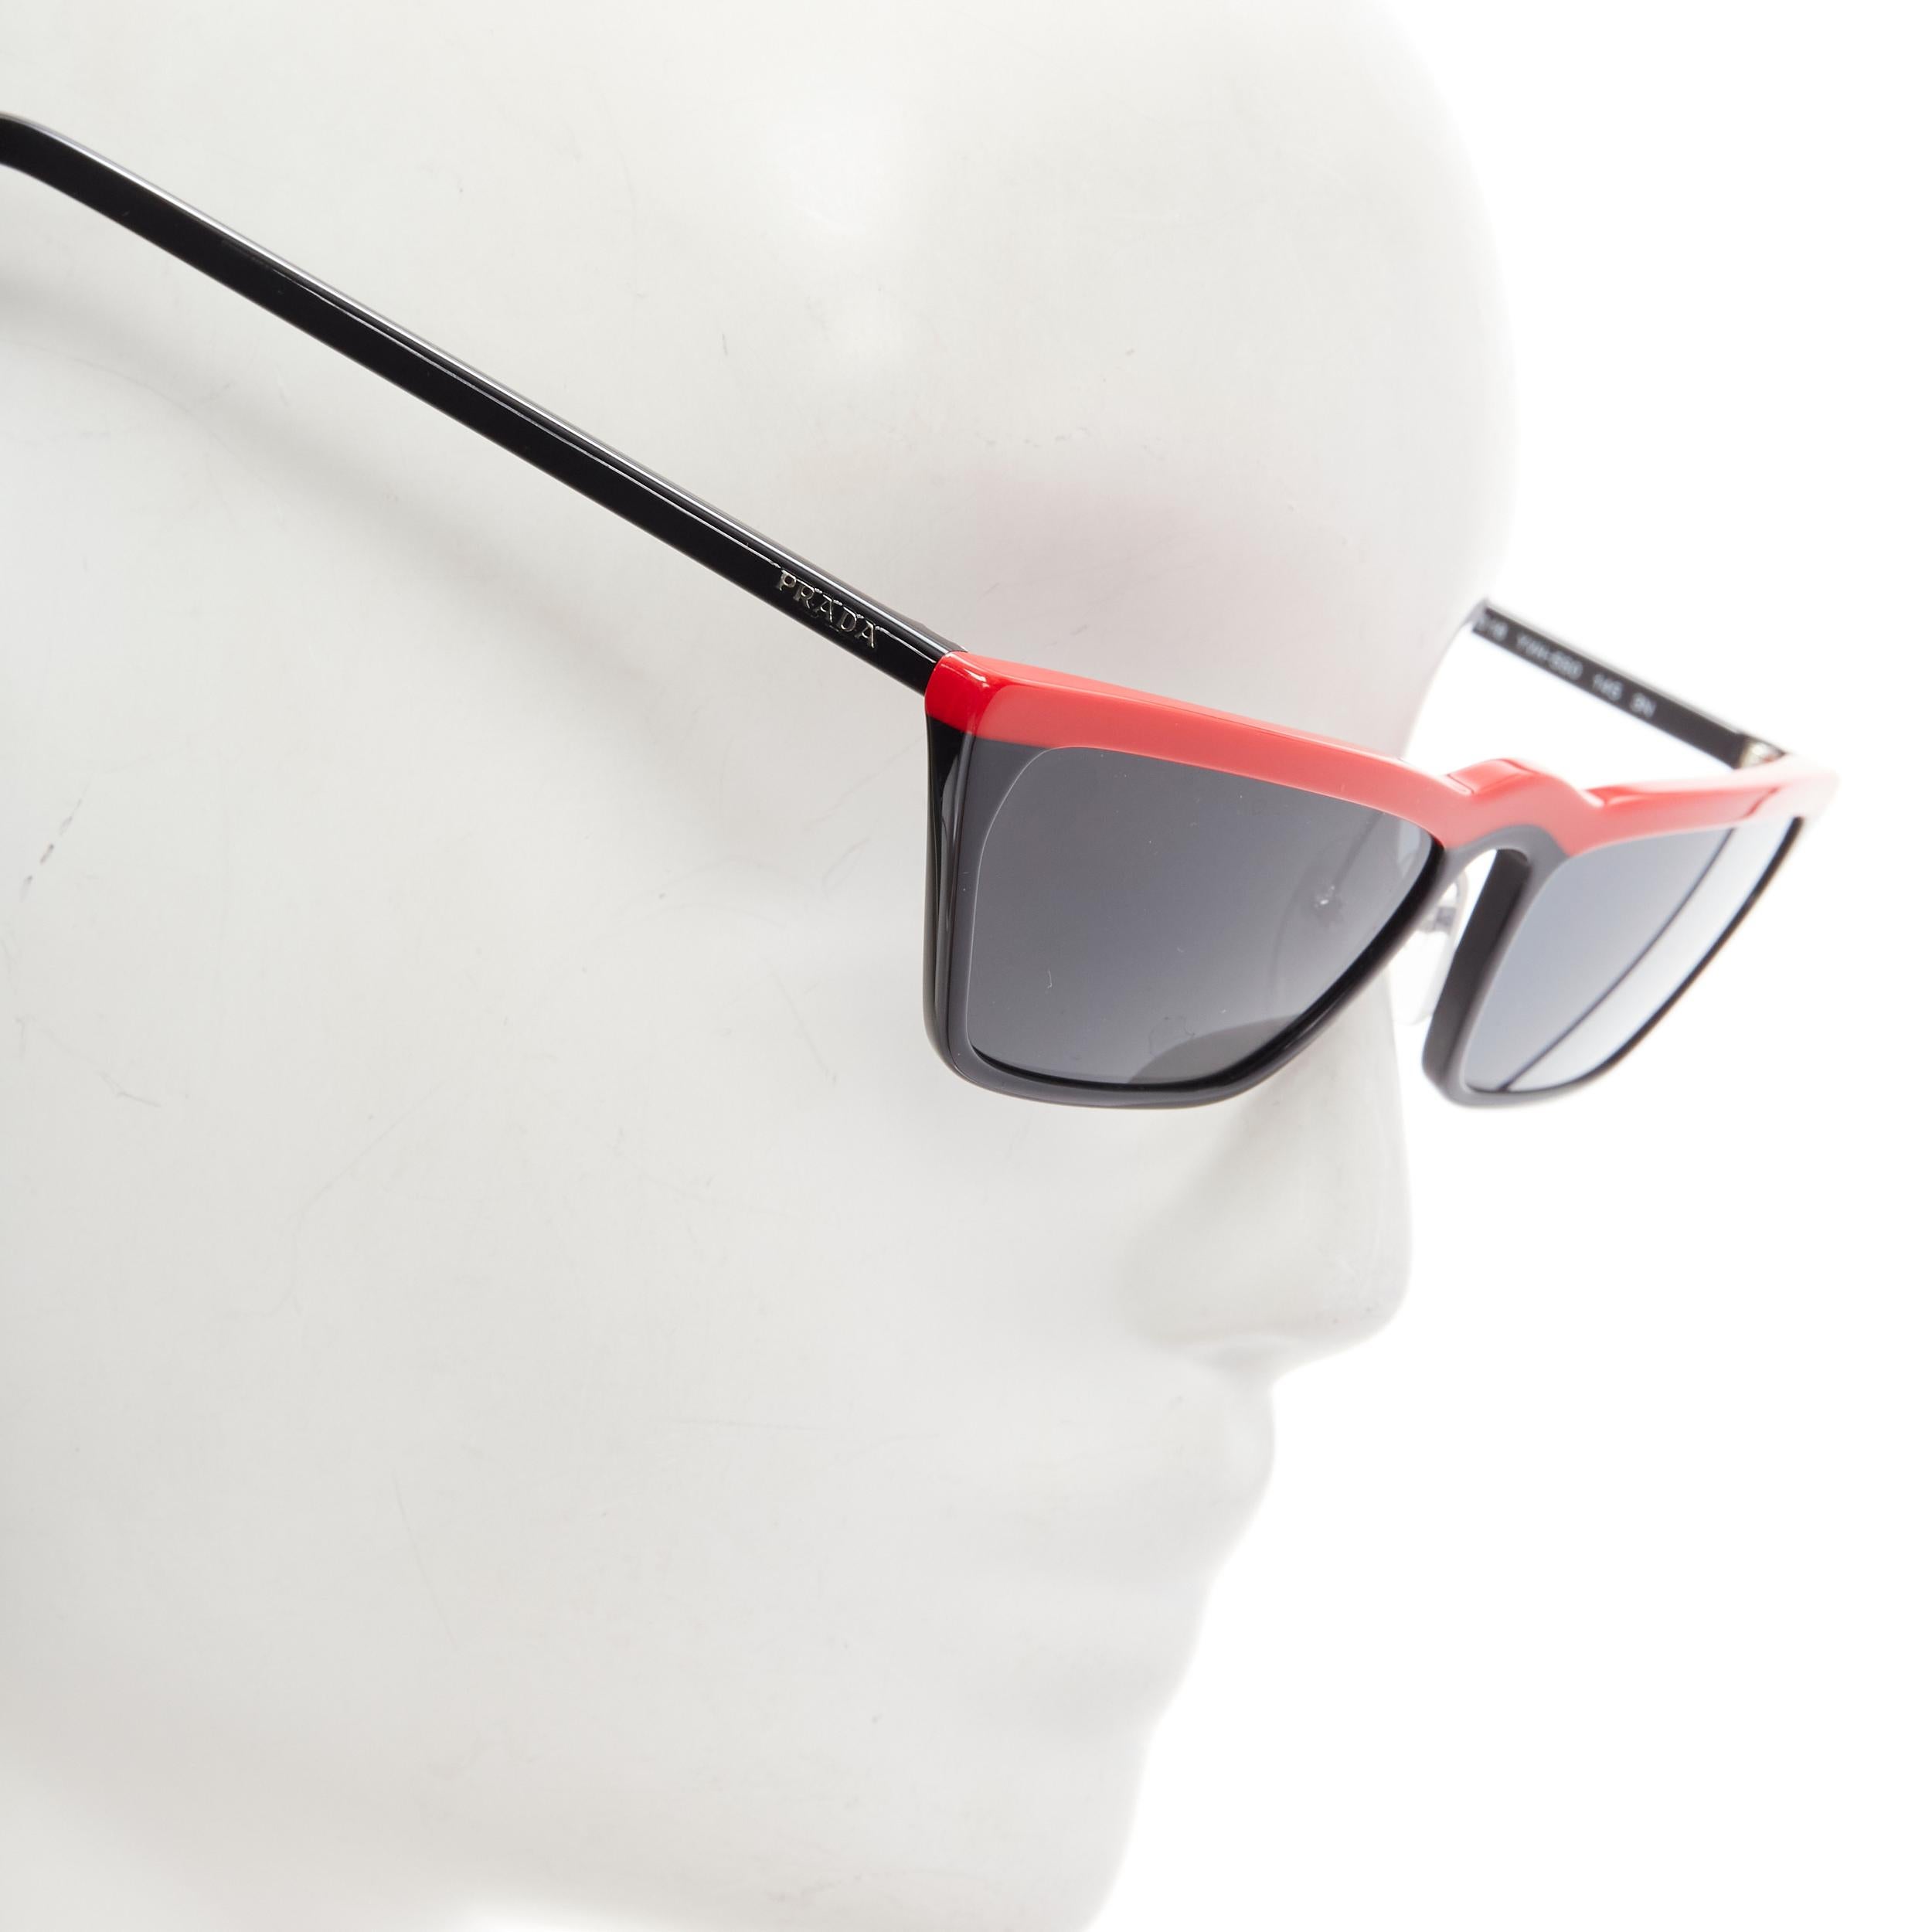 PRADA SPR19U black red Linea Rossa cateye sunglasses Y2K 
Reference: ANWU/A00093 
Brand: Prada 
Designer: Miuccia Prada 
Material: Acetate 
Color: Black 
Pattern: Solid 
Made in: Italy 


CONDITION: 
Condition: Excellent, this item was pre-owned and